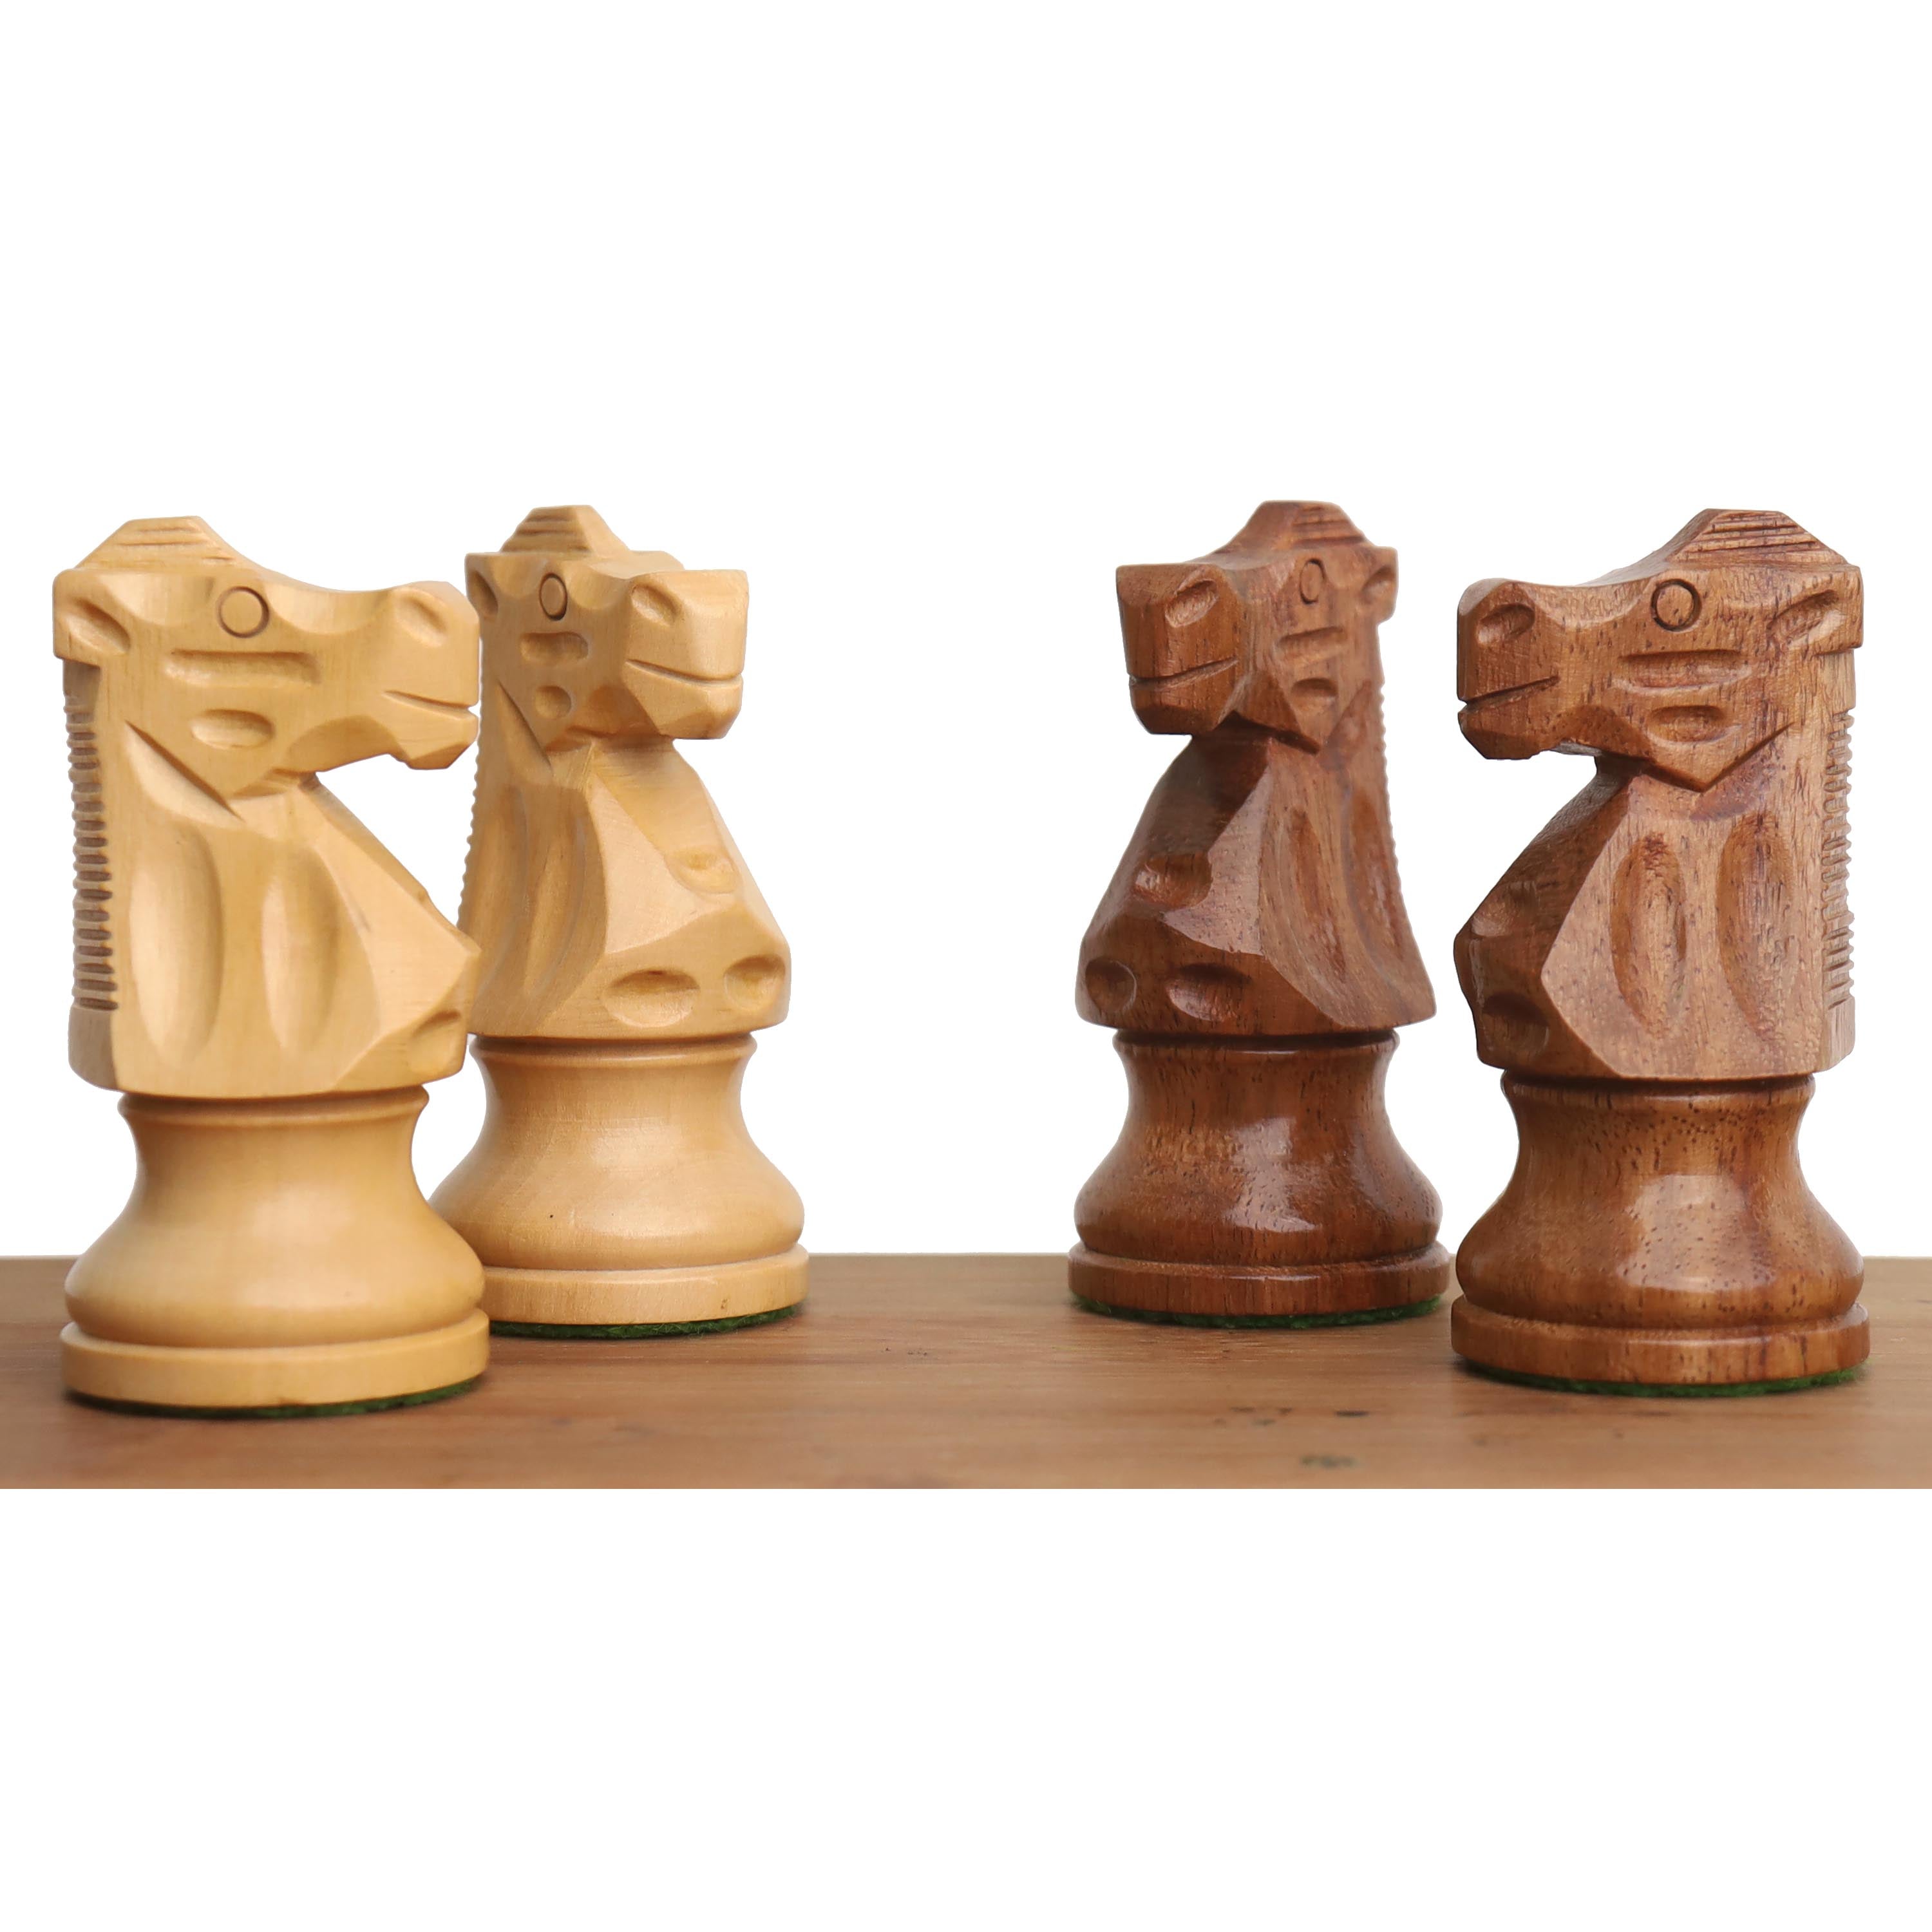 French Lardy Staunton Chess Pieces set - Weighted Golden Rose wood  - 4 Queens